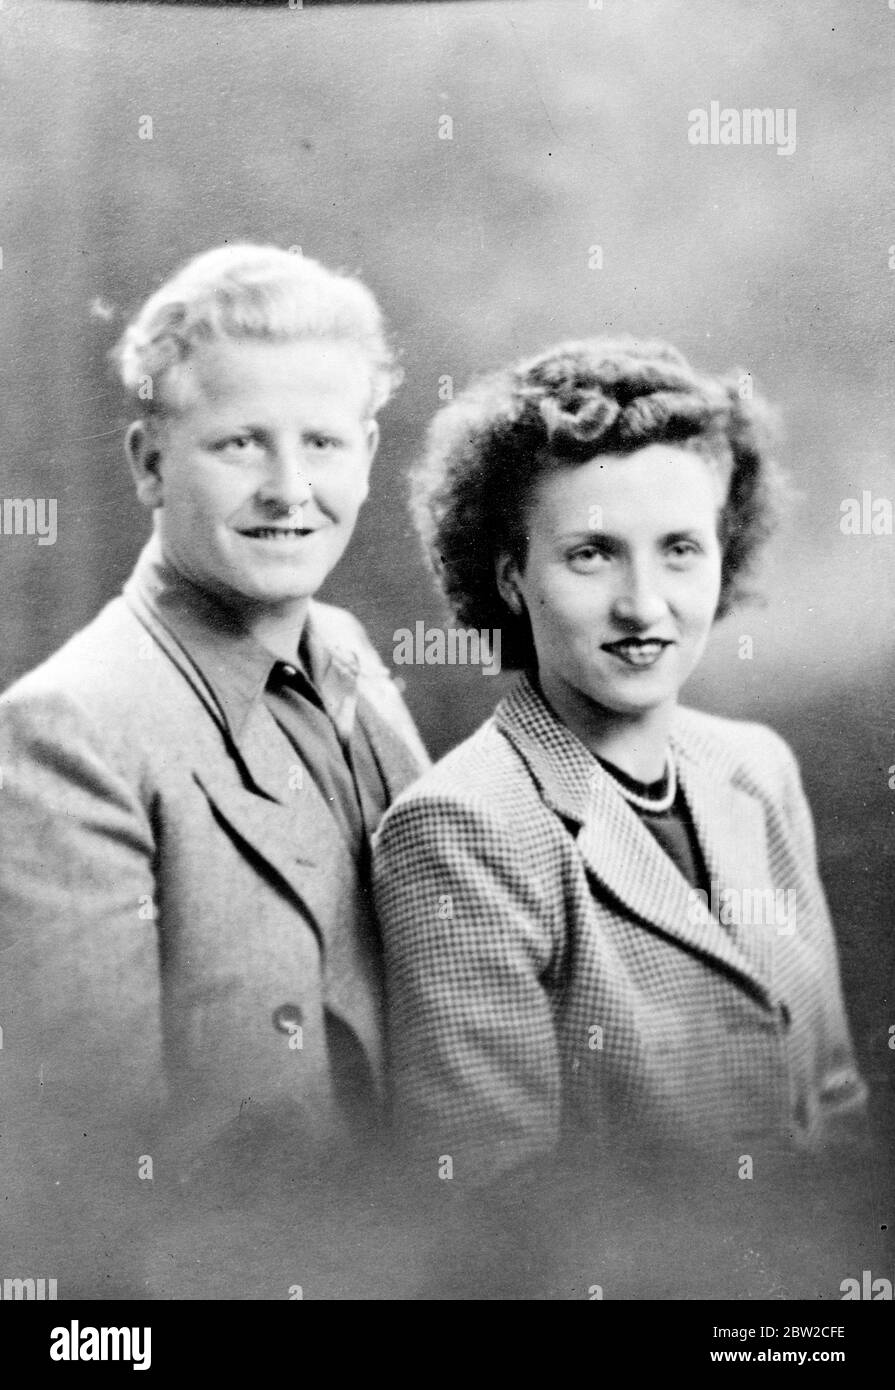 Sergeant Reginald Watters of Leeds with his German wife Maria Mia Winegar. They married in Leeds sometime in 1947. He was found hanged in a German barrack block 18 months ago. His body is to be exhumed in Germany. 1940s [Sergeant Frederick Emmett Dunne, of the 8th Training Battalion, REME, stationed at Taunton, Somerset was charged at Bow Street yesterday with the murder of Sergeant Reginald Watters, at Duisberg, Germany, on November 30, 1953 . He will appear in court today. Seven months after the inquest on Sergeant Watters, his German born widow, Maria, married Sergeant Dunne. Stock Photo